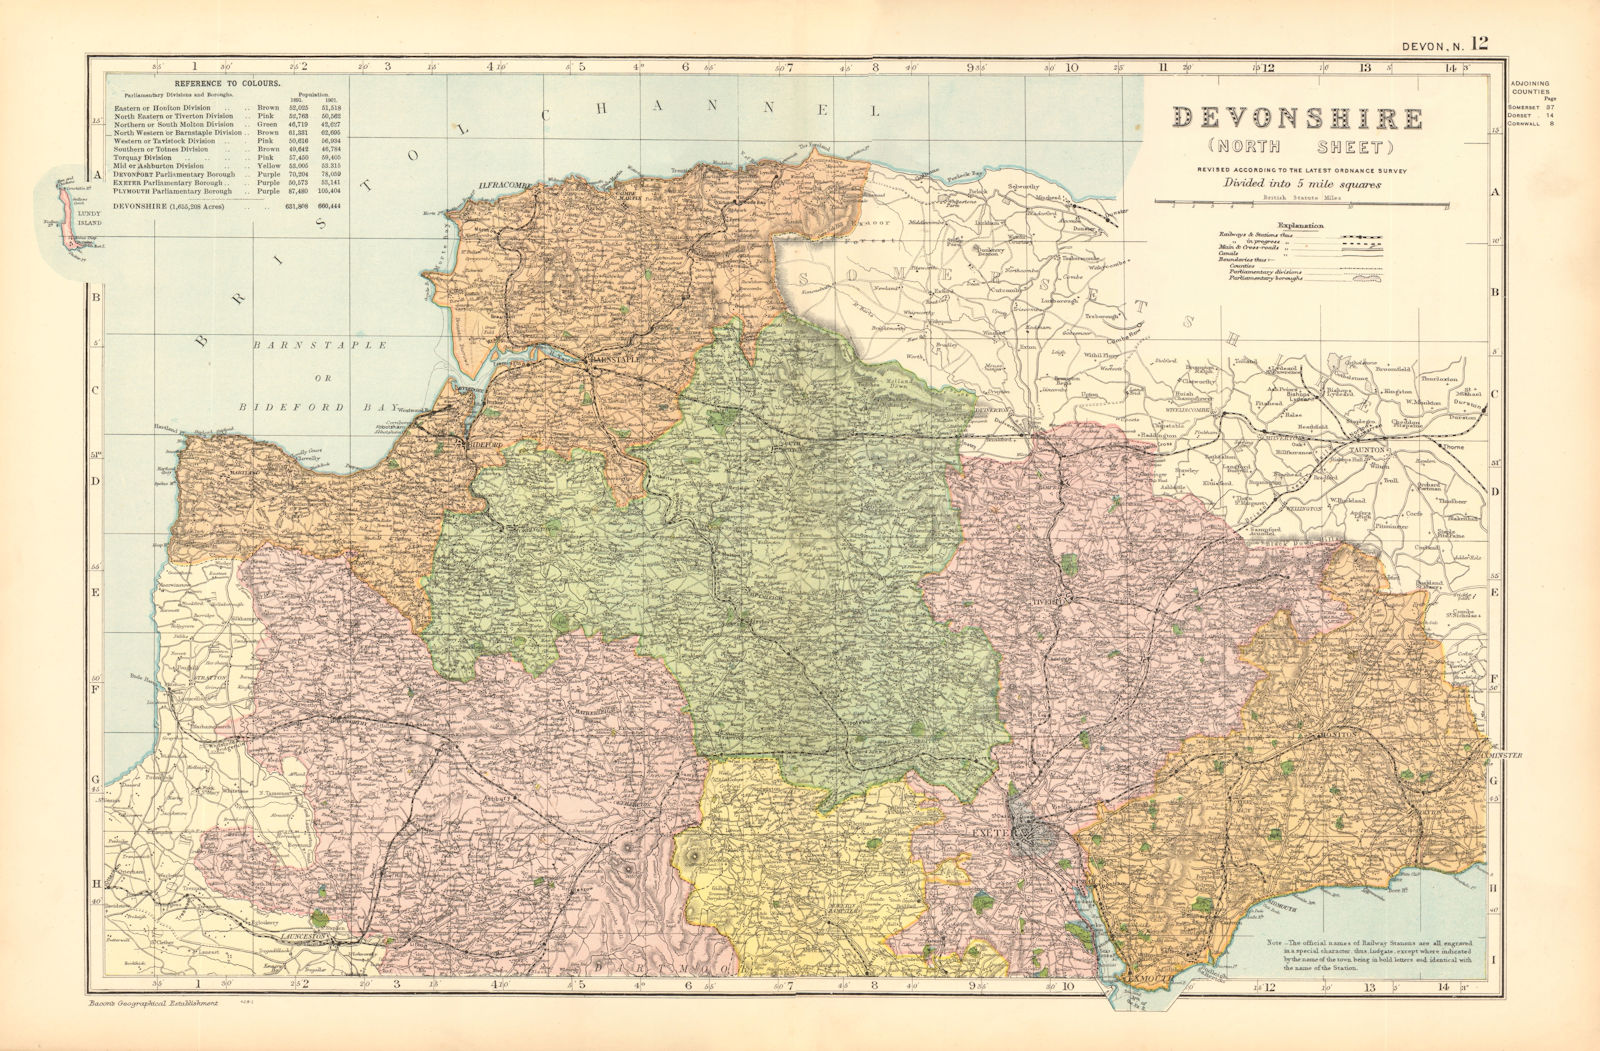 DEVONSHIRE (NORTH). Parliamentary divisions. Parks. Devon. BACON 1904 old map